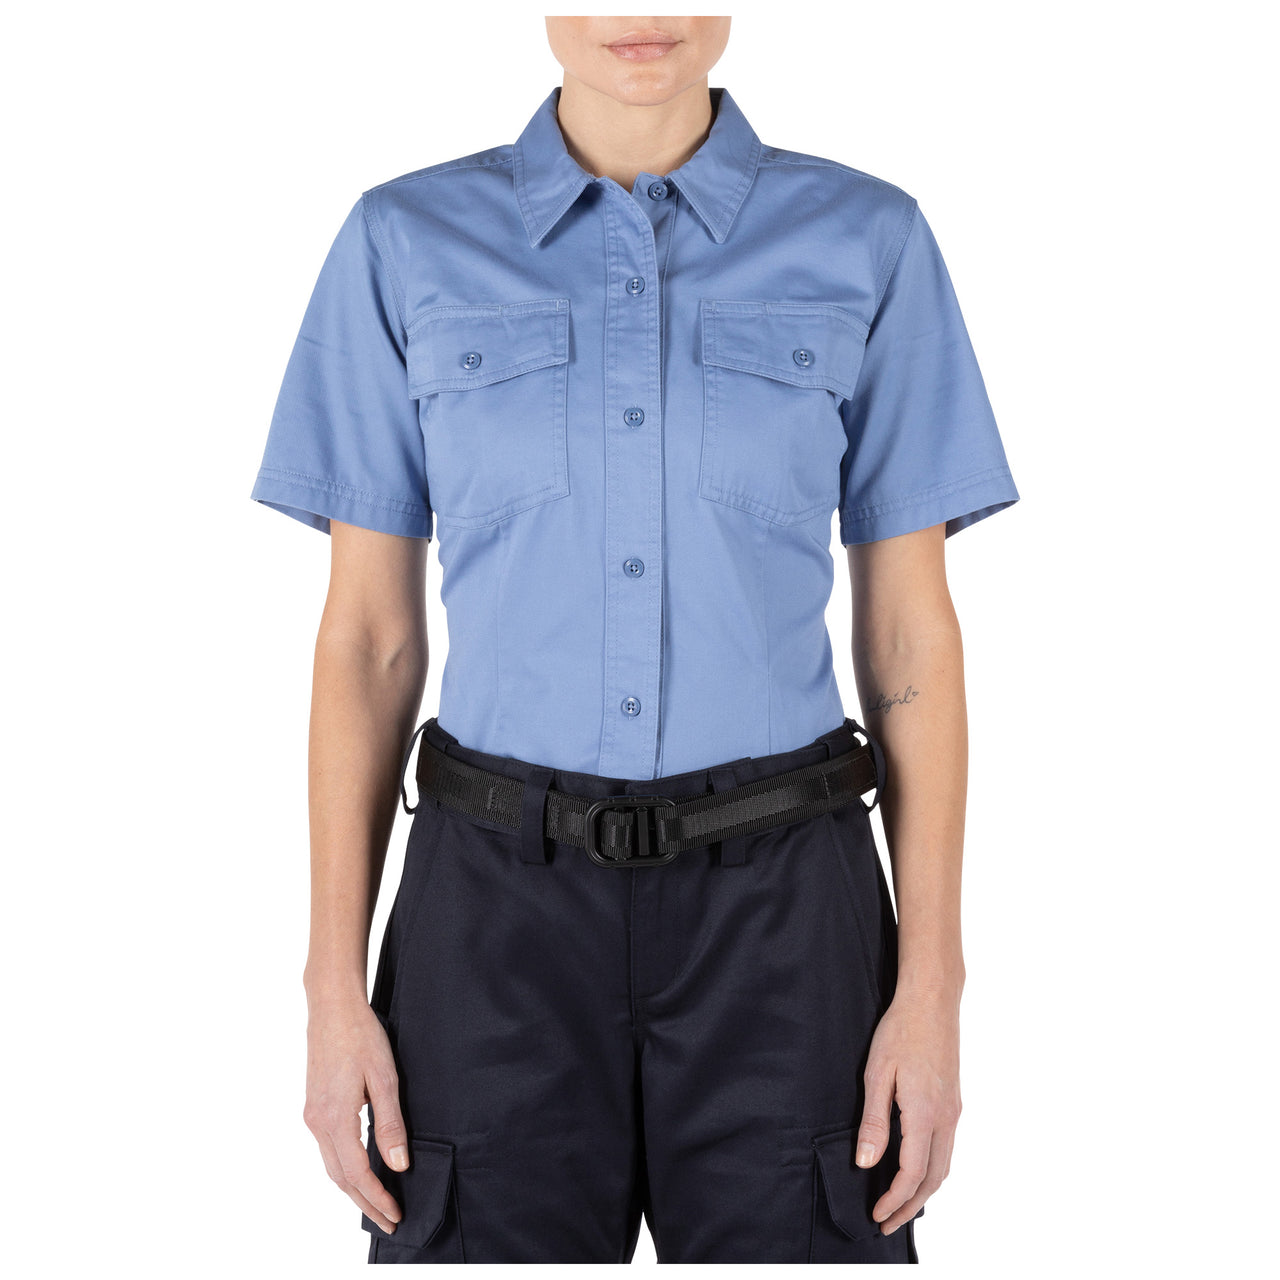 5.11 Tactical Women's Company Short Sleeve Shirt (61321) | The Fire Center | Fuego Fire Center | FIREFIGHTER GEAR | Ready to answer every call through a busy shift, the Company Shirt backs you with a vital layer of safety (certified to NFPA 1975, 2019 edition) in a high-tech, low maintenance fabric. It’s made with a soft, yet durable cotton twill